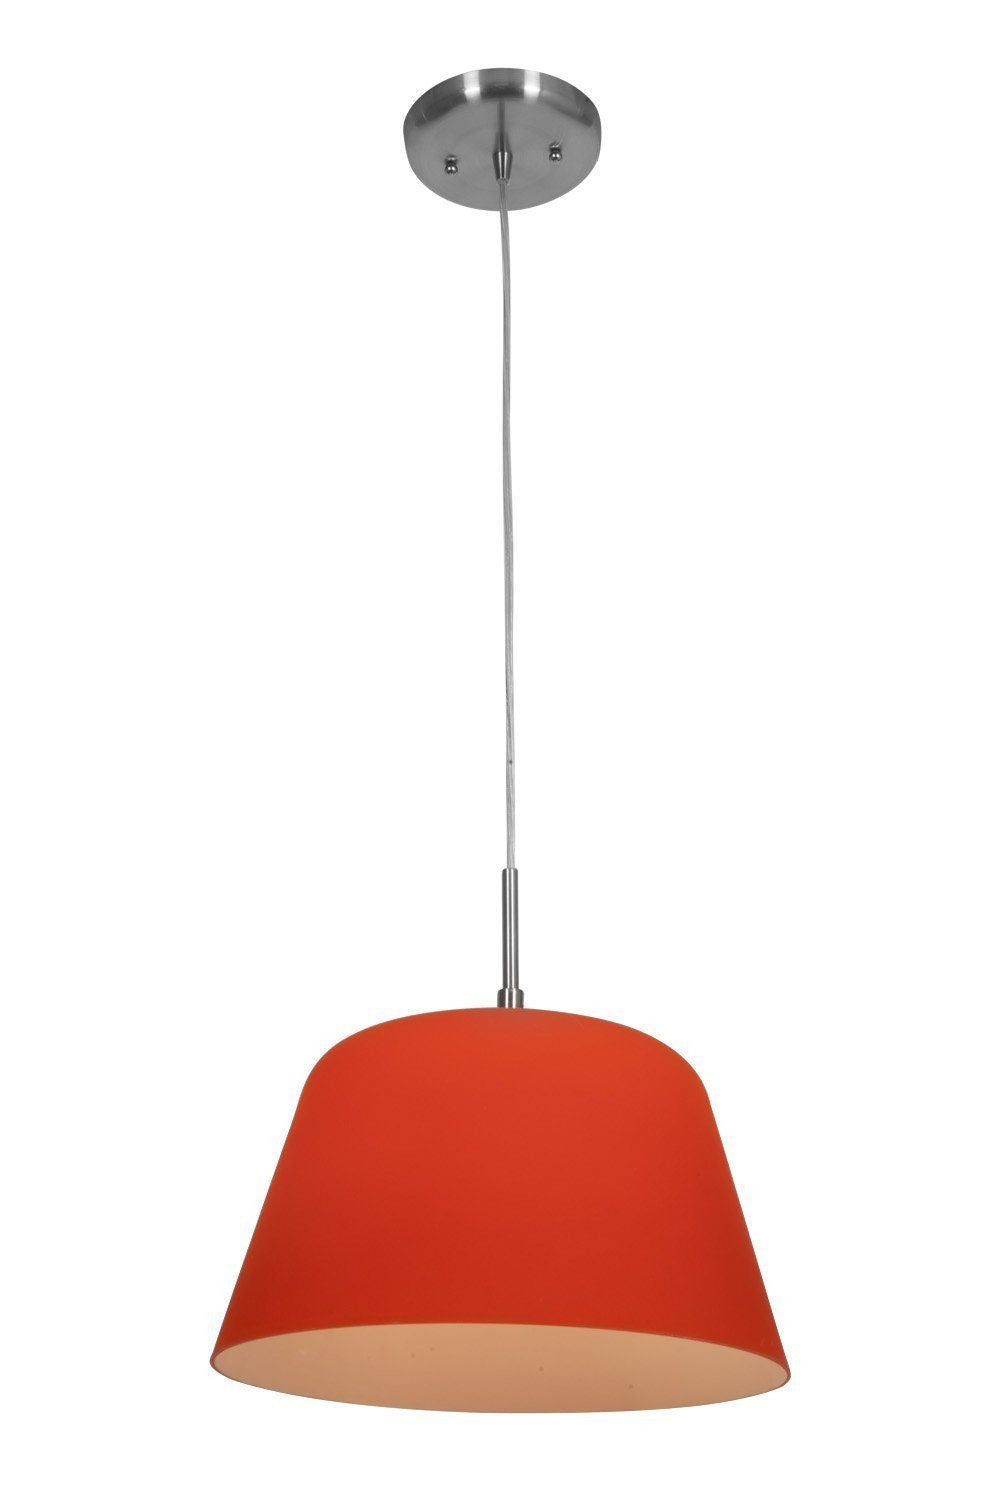 Access Lighting 50170 BS ORG One Light Energy Saving GU24 Fluorescent Hanging Pendant in Brushed Steel Finish with Orange Glass